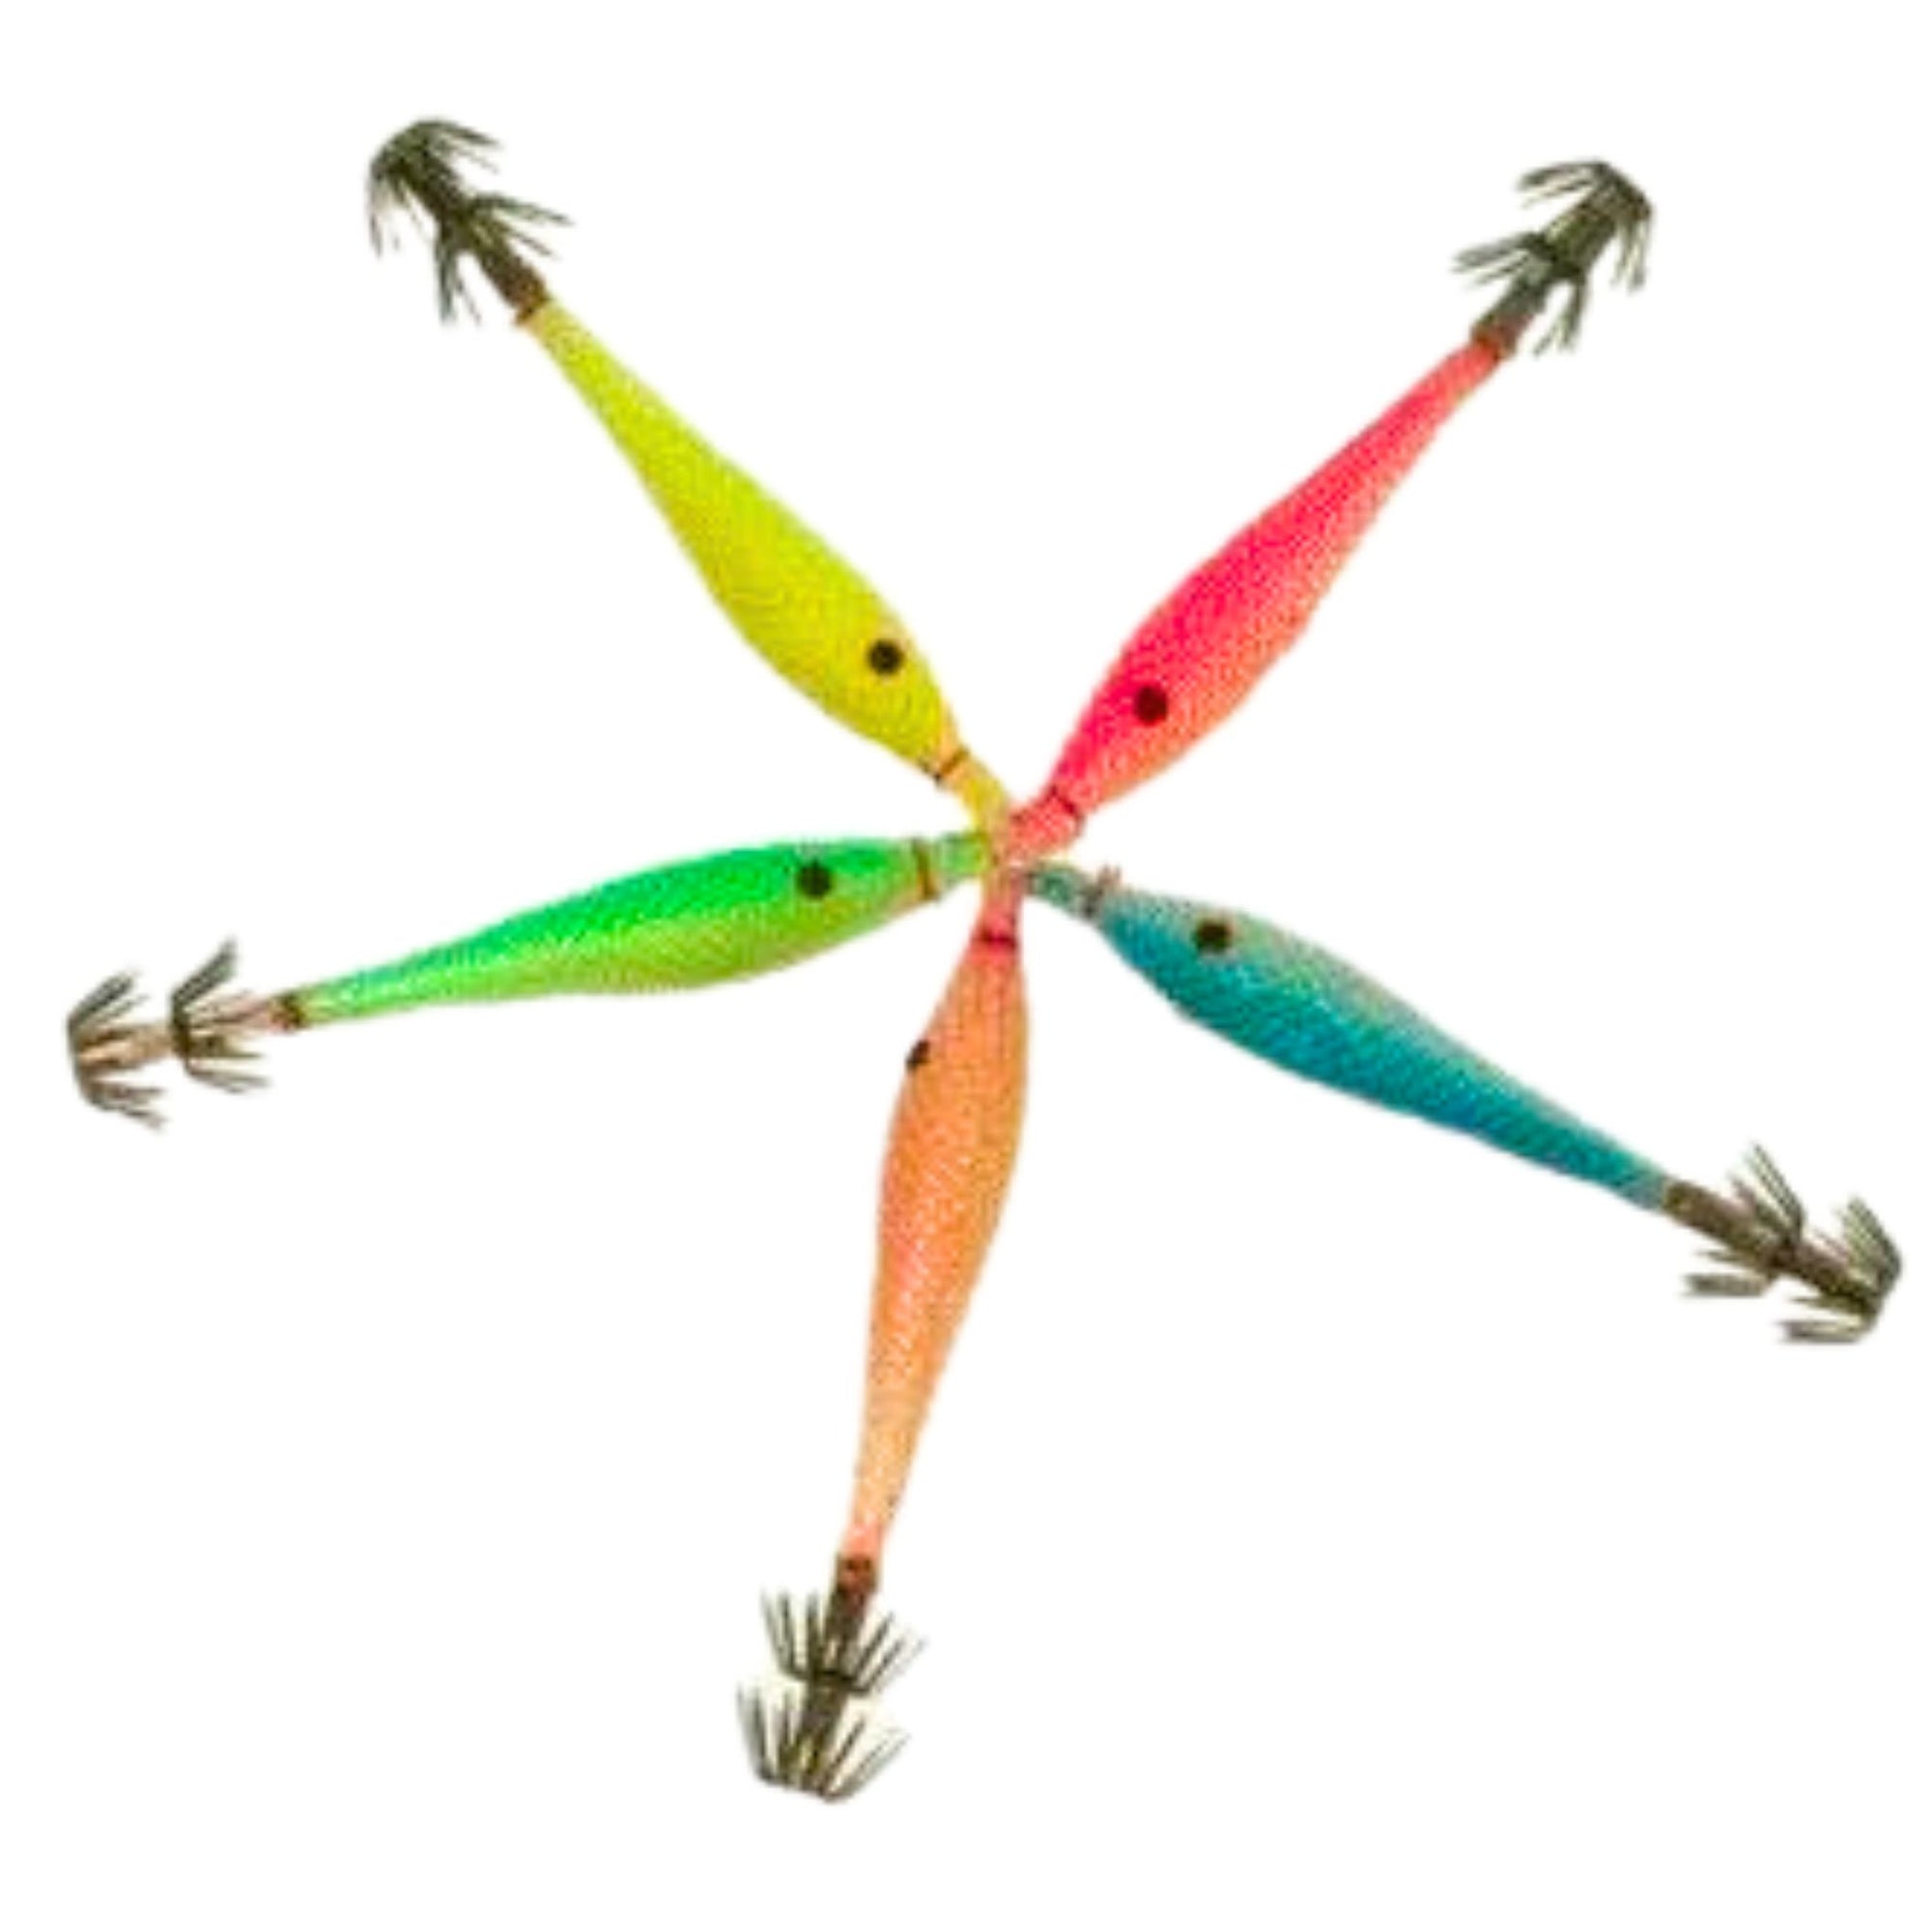 Kamikaze Soft Plastic Type Squid Jigs 5 Pack - South East Clearance Centre